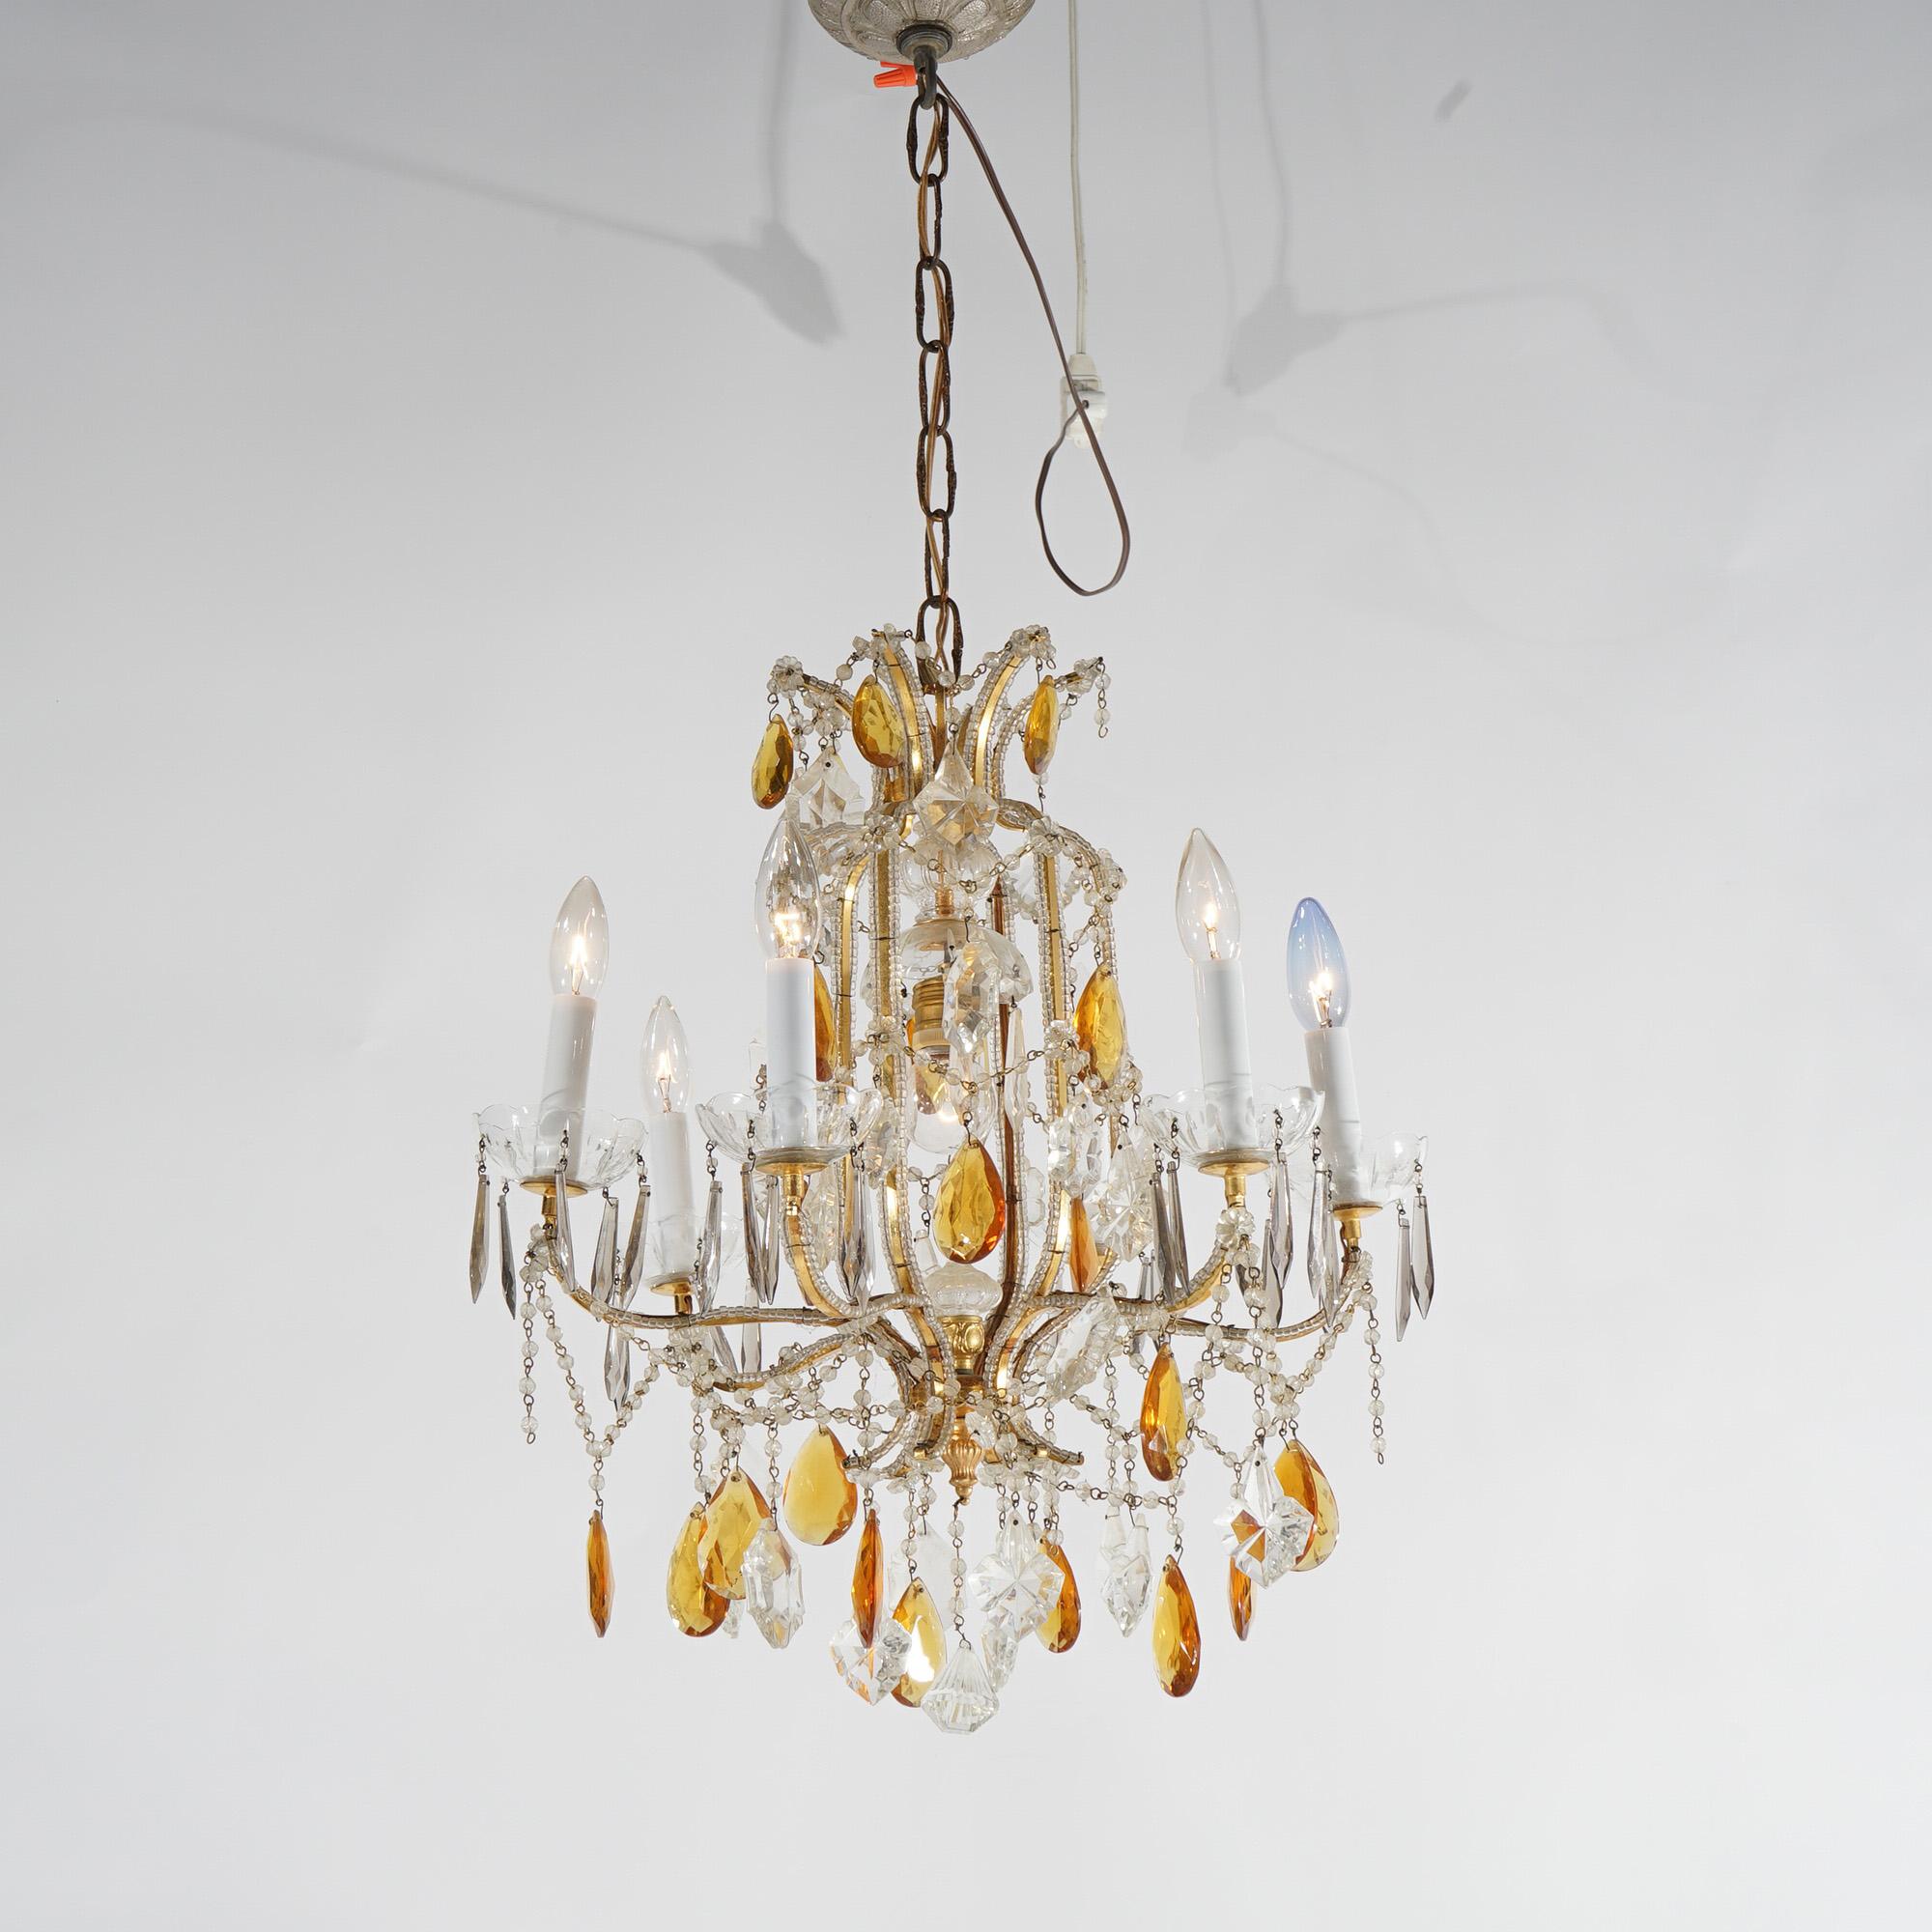 French Louis. XIV Style Seven-Light Crystal Chandelier with Amber Prisms, 20th C For Sale 7